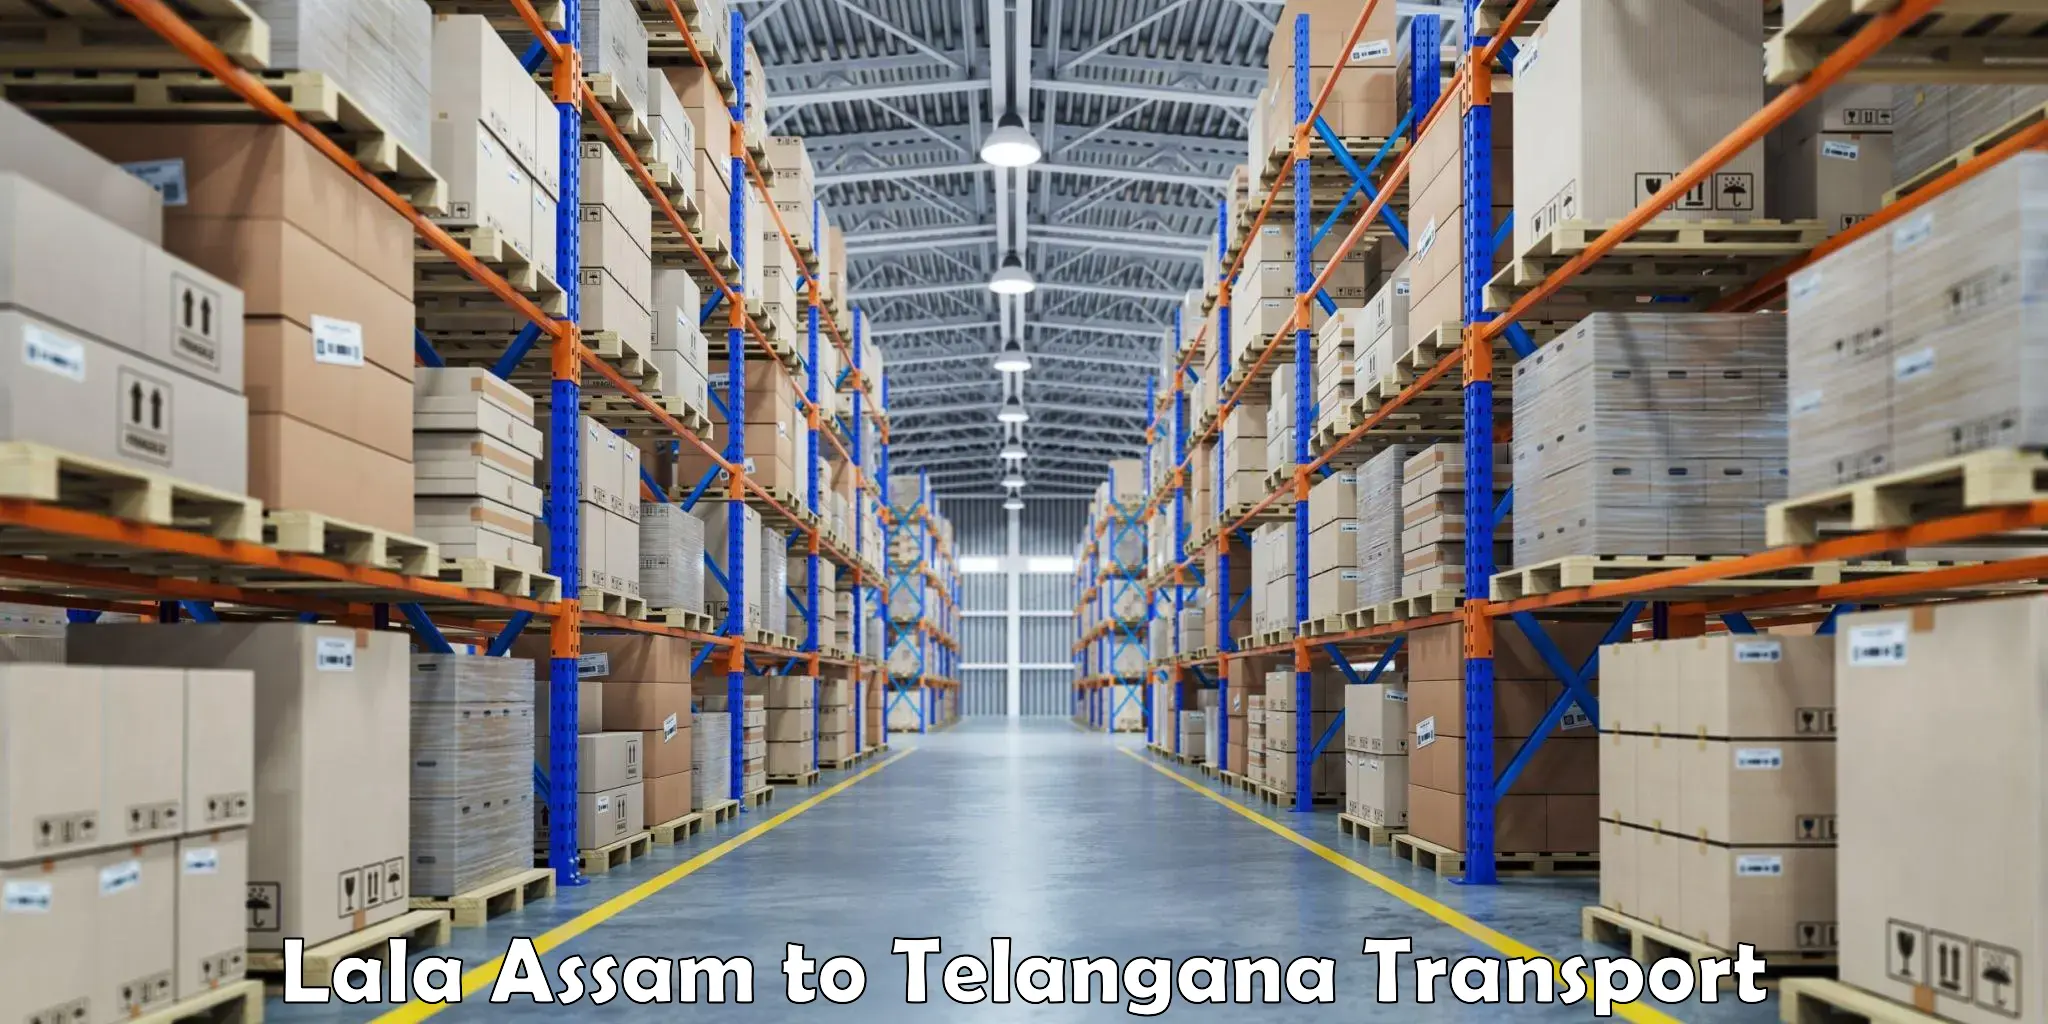 Road transport online services Lala Assam to Danthalapally